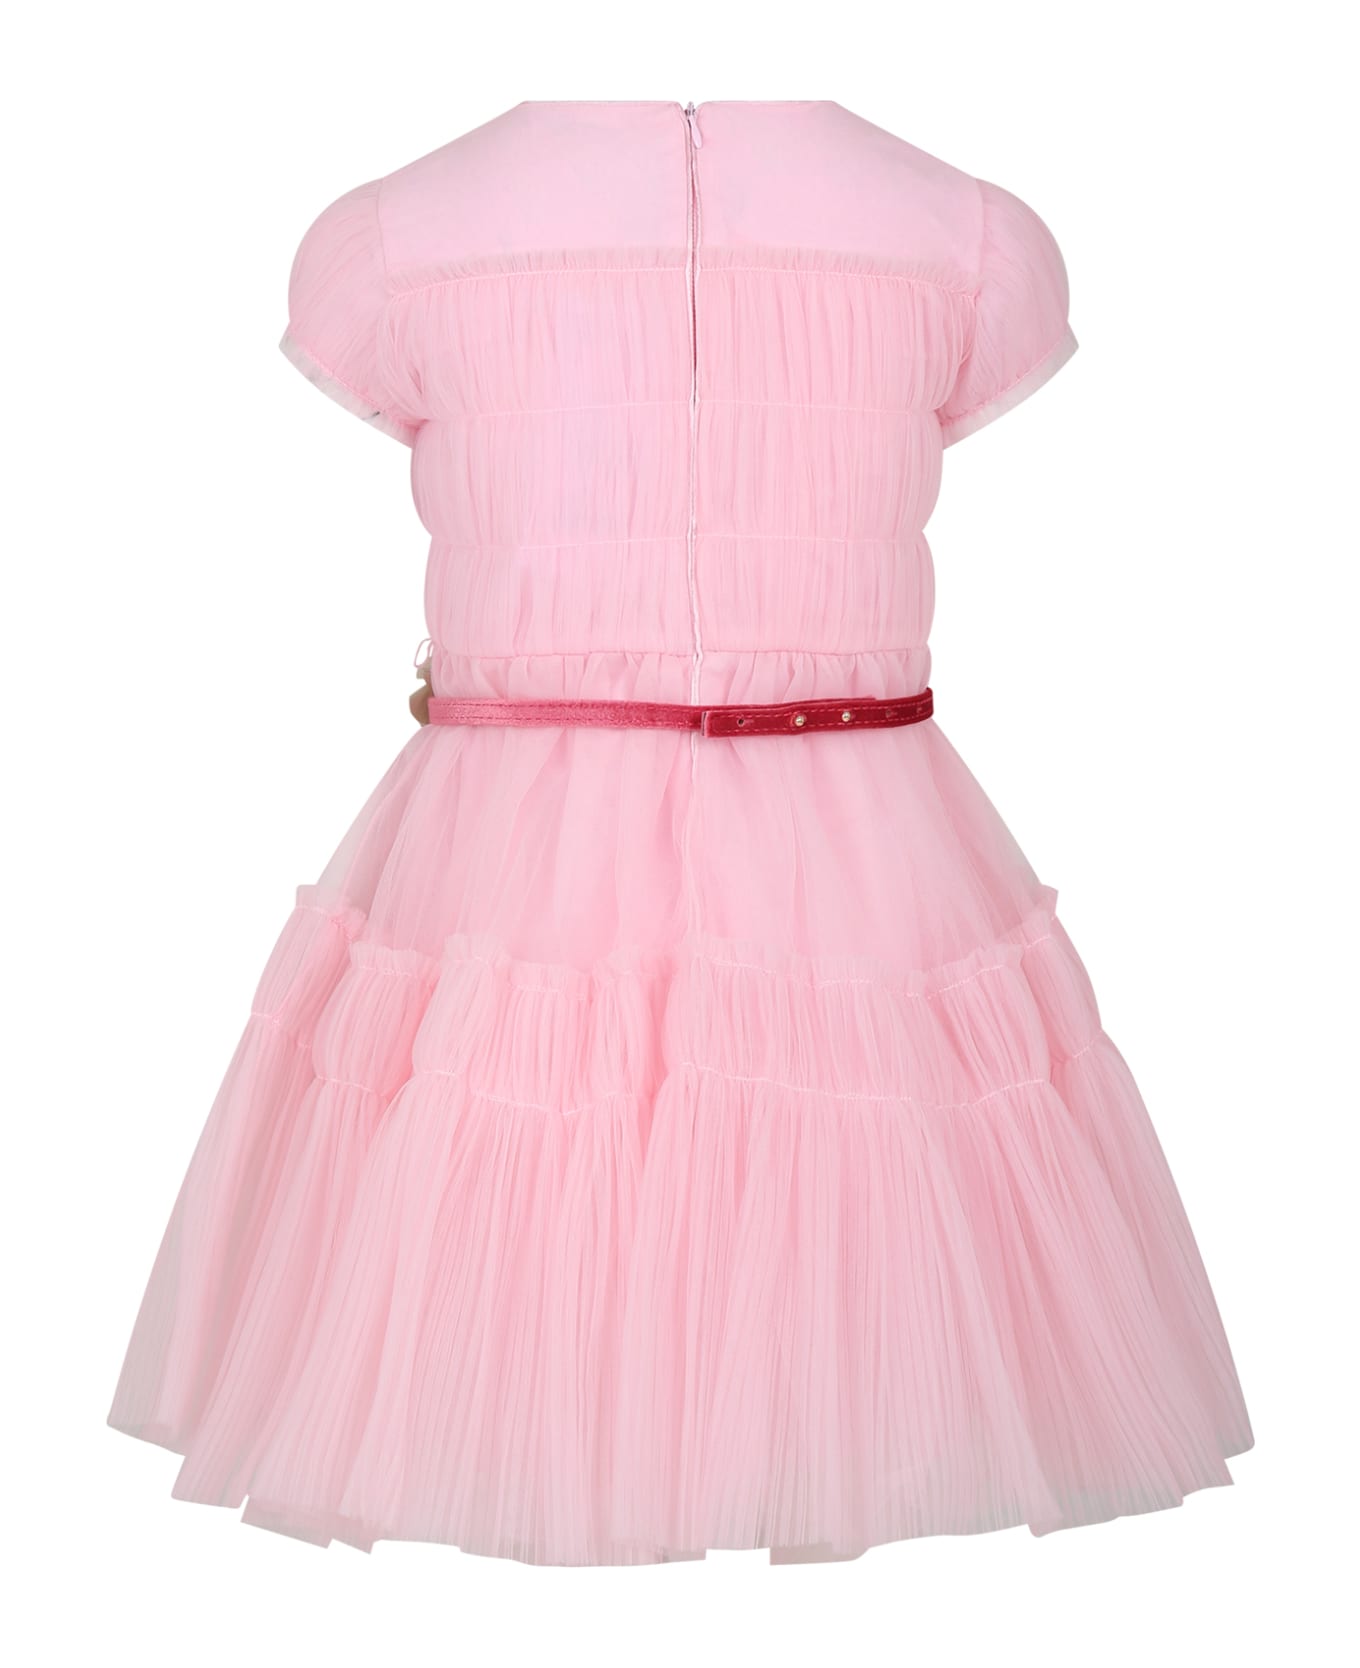 Monnalisa Pink Dress For Girl With Flowers - Pink